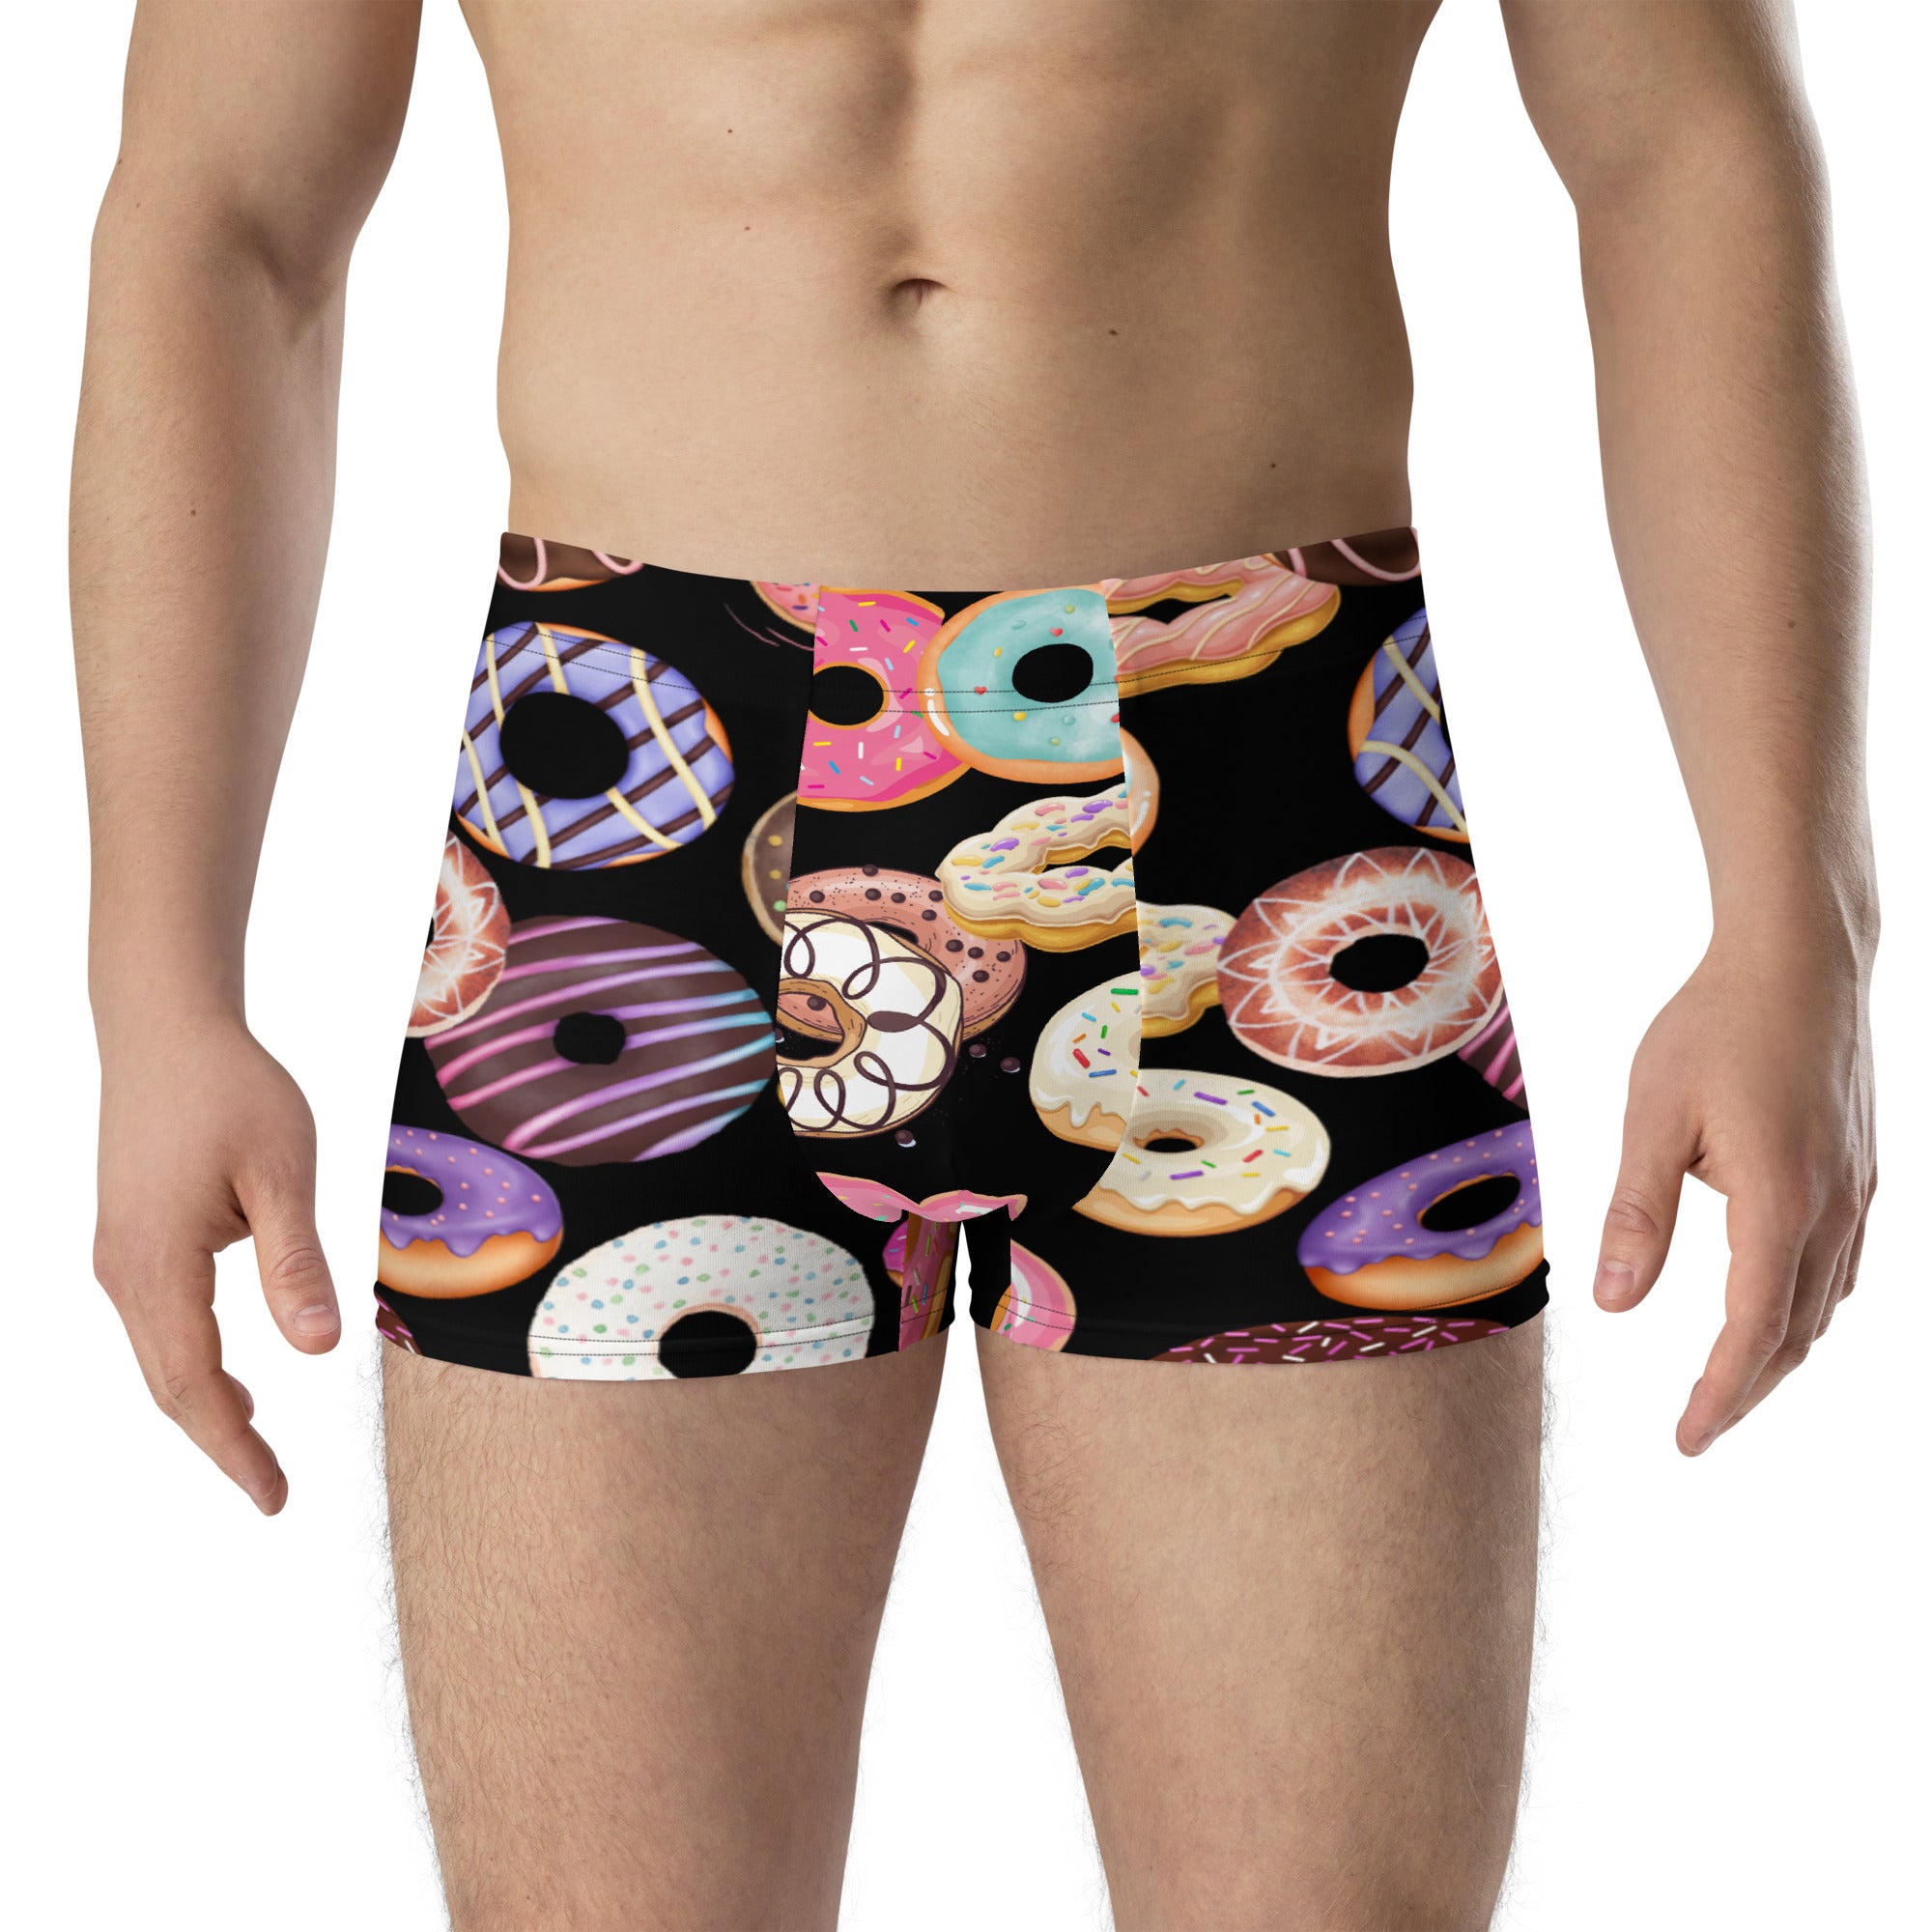 Durable black boxer briefs with donut pattern